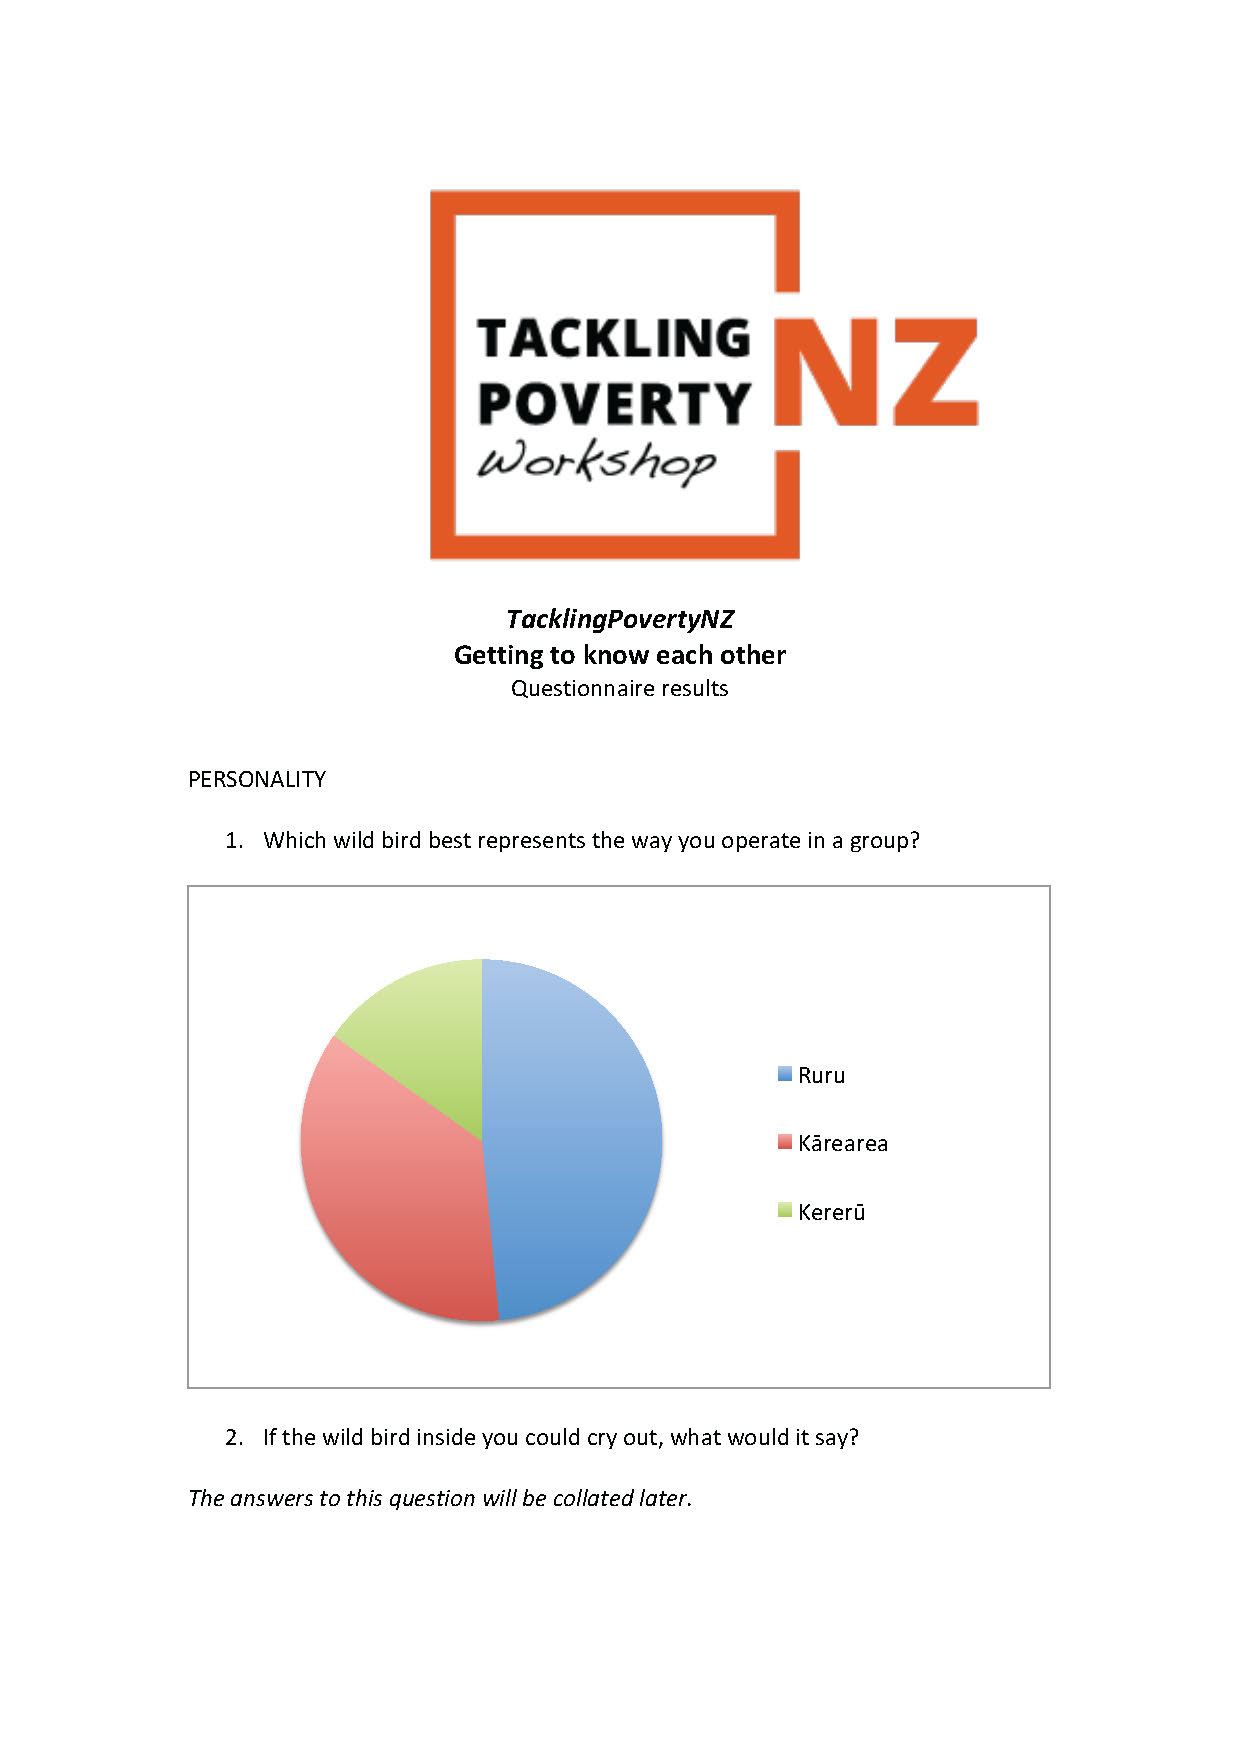 20151208 FINAL TPNZ questionnaire - plenary results page one